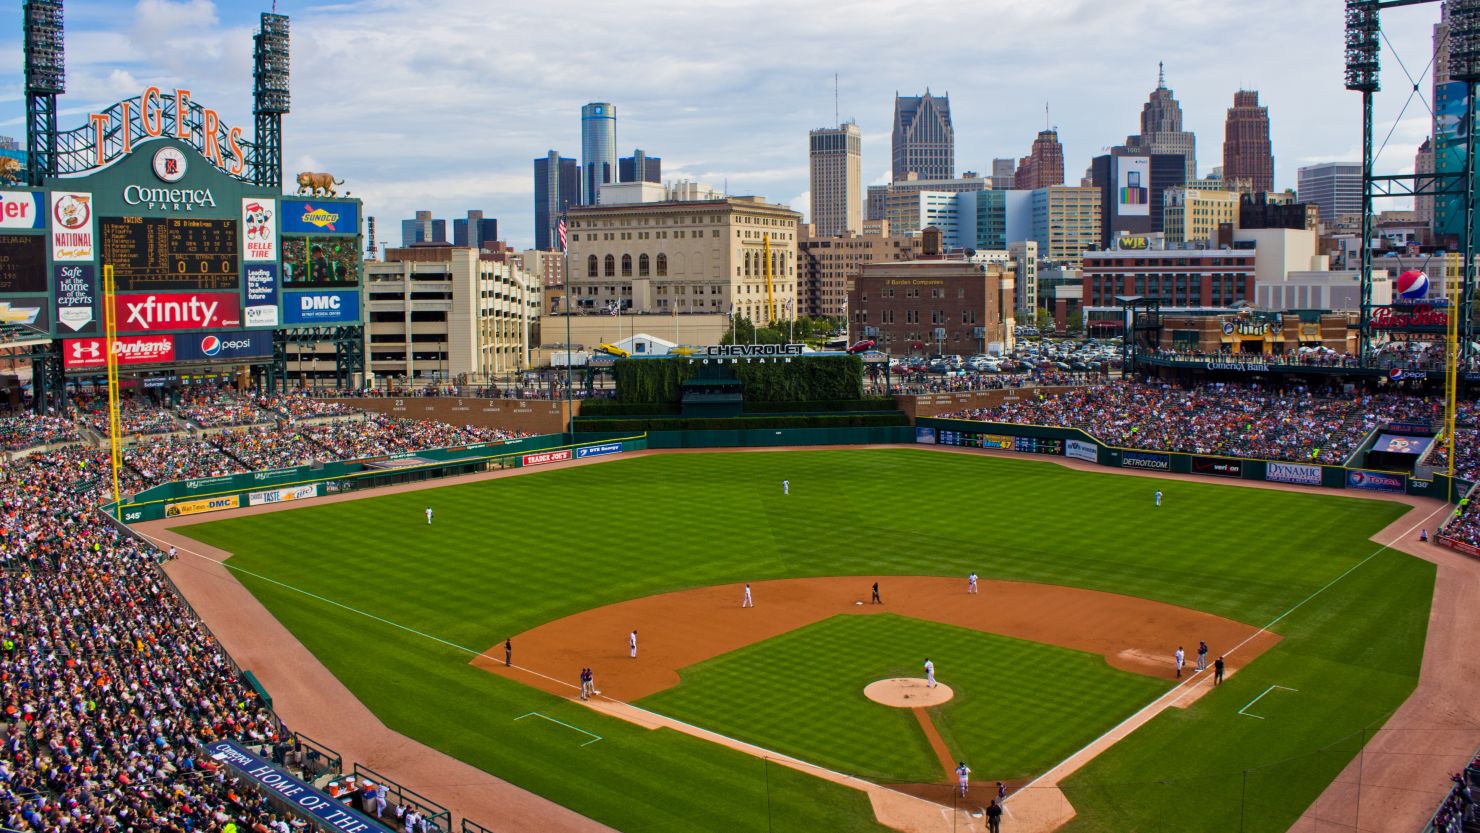 Comerica Park, home of the Detroit Tigers, looks out on the Detroit skyline.